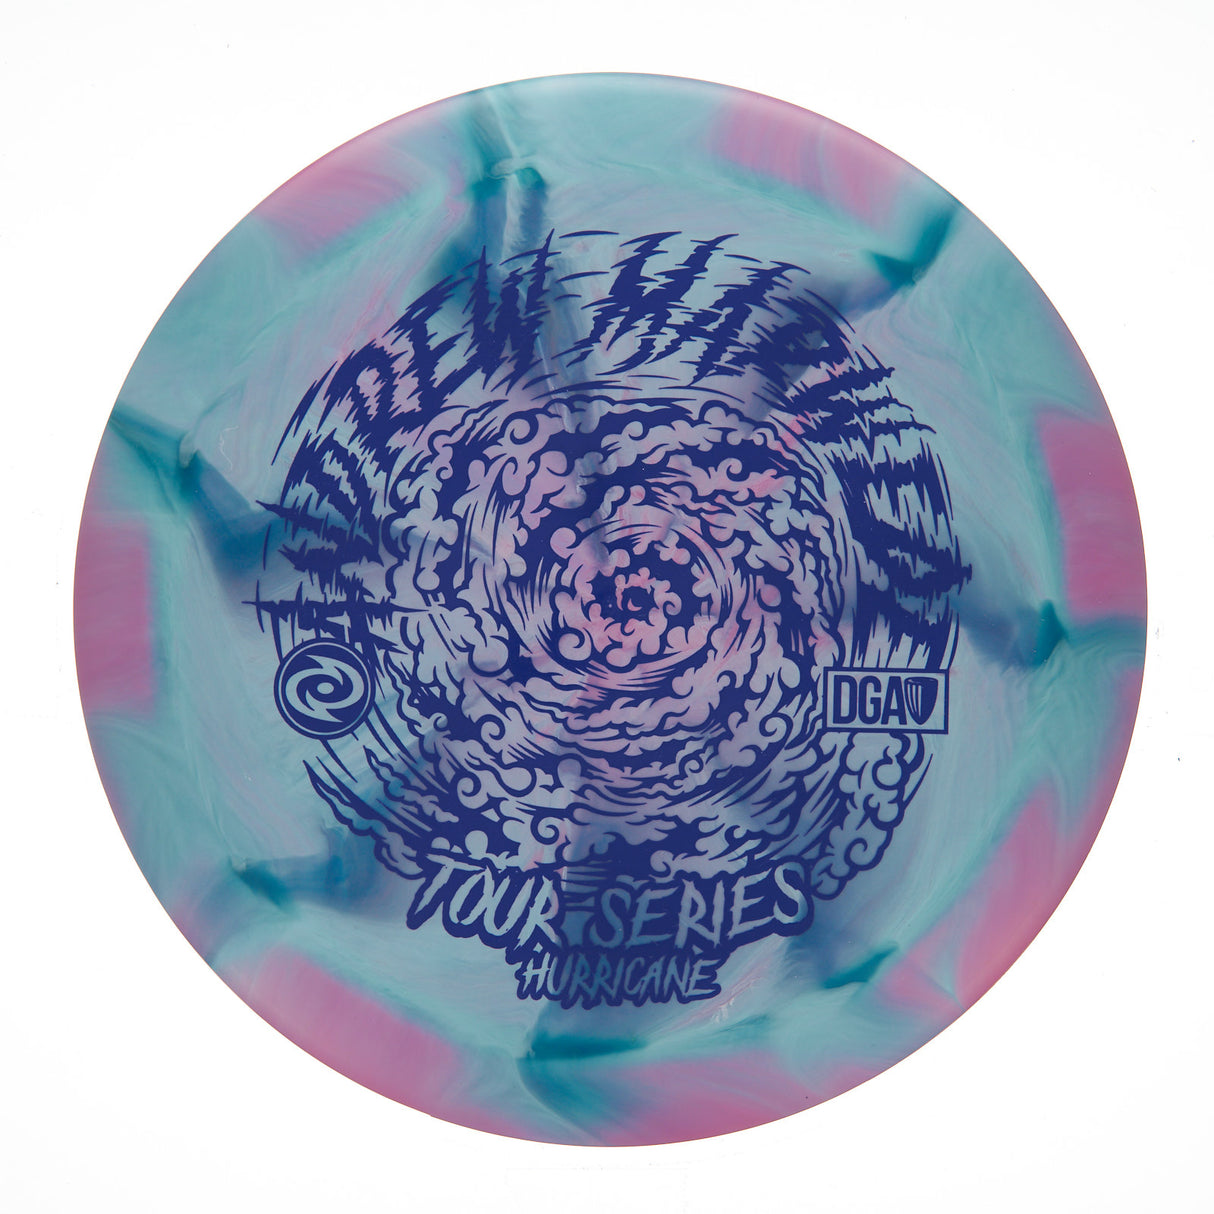 DGA Hurricane - 2022 Andrew Marwede Tour Series Swirl 176g | Style 0011